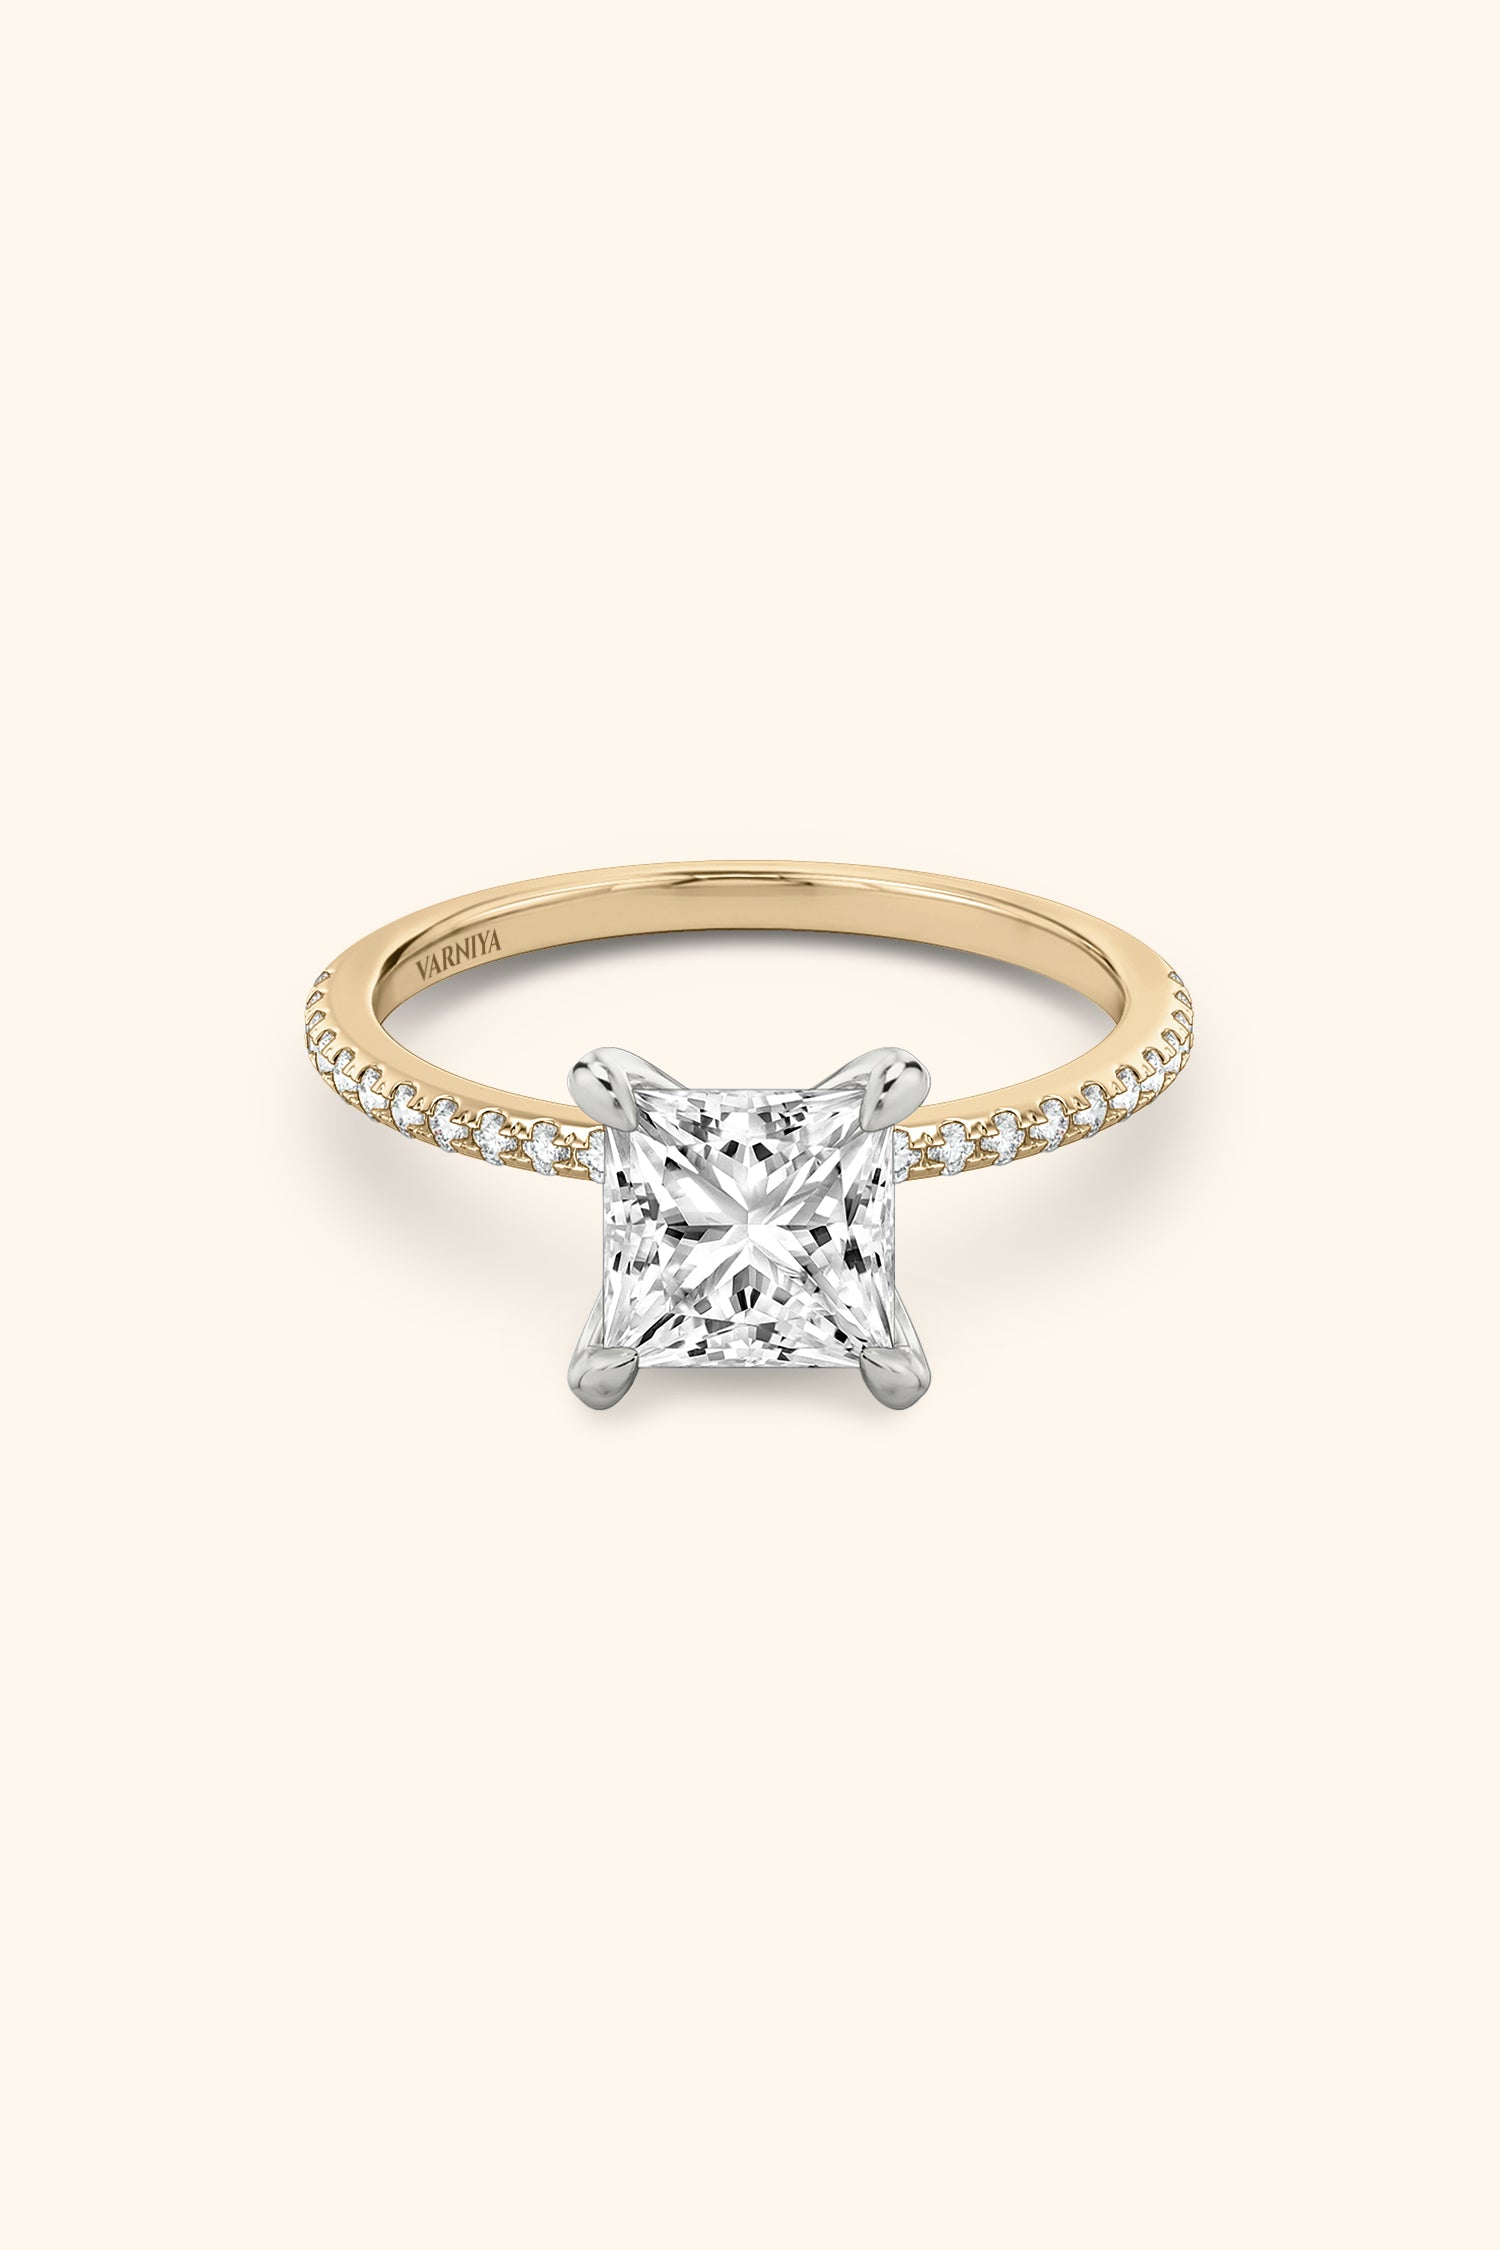 Dual Tone Glance Pavé Ring with 3 Carat Princess Solitaire